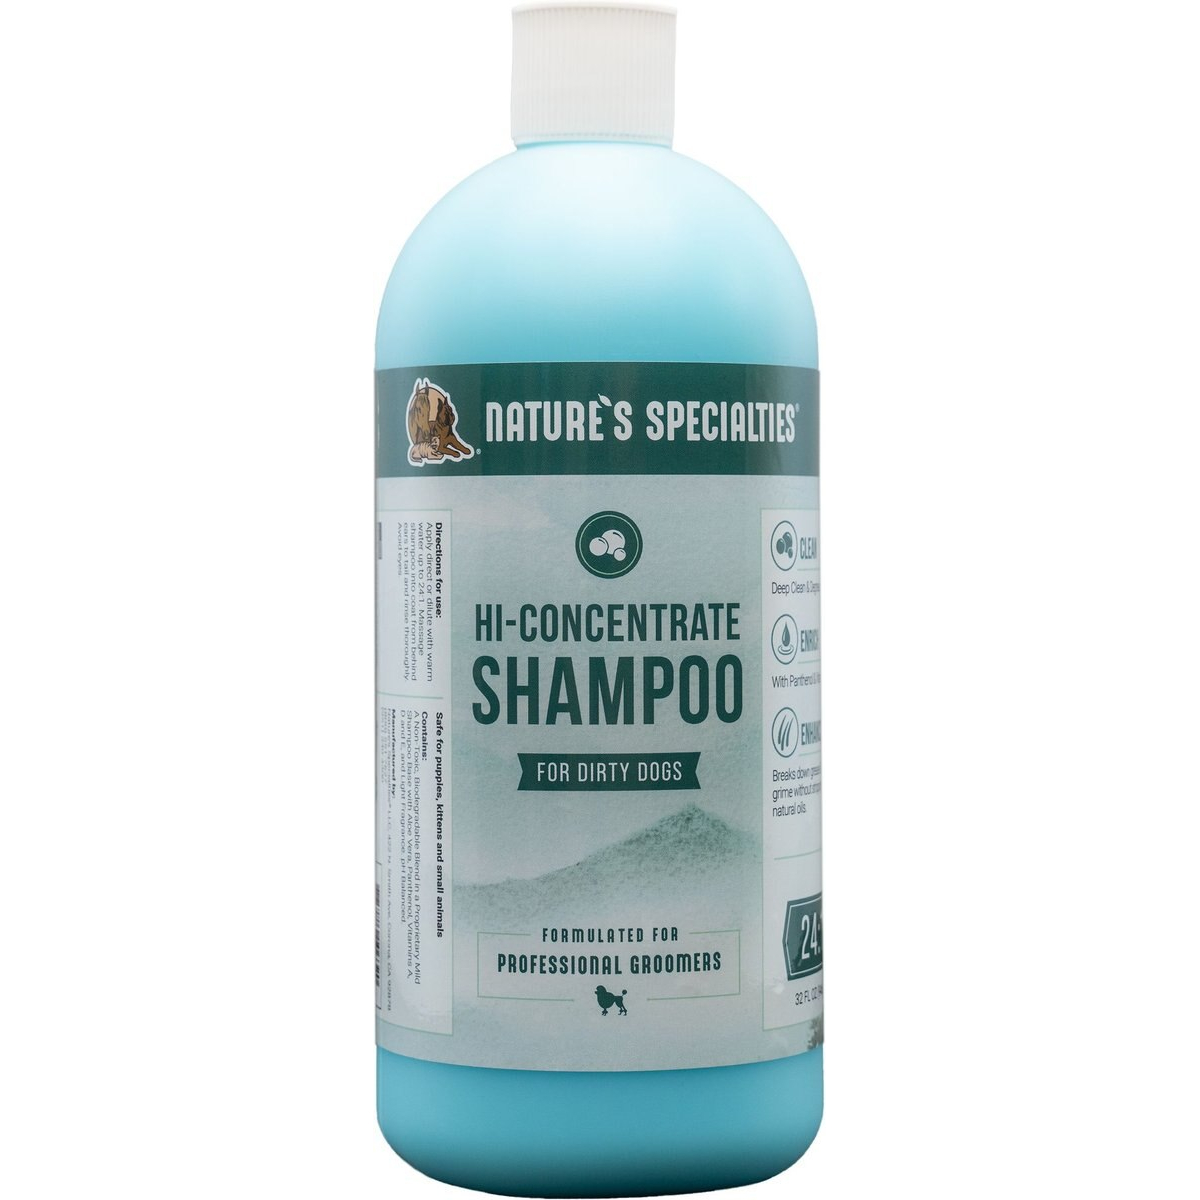 Nature's Specialties High Concentrate Shampoo for Dirty Dogs